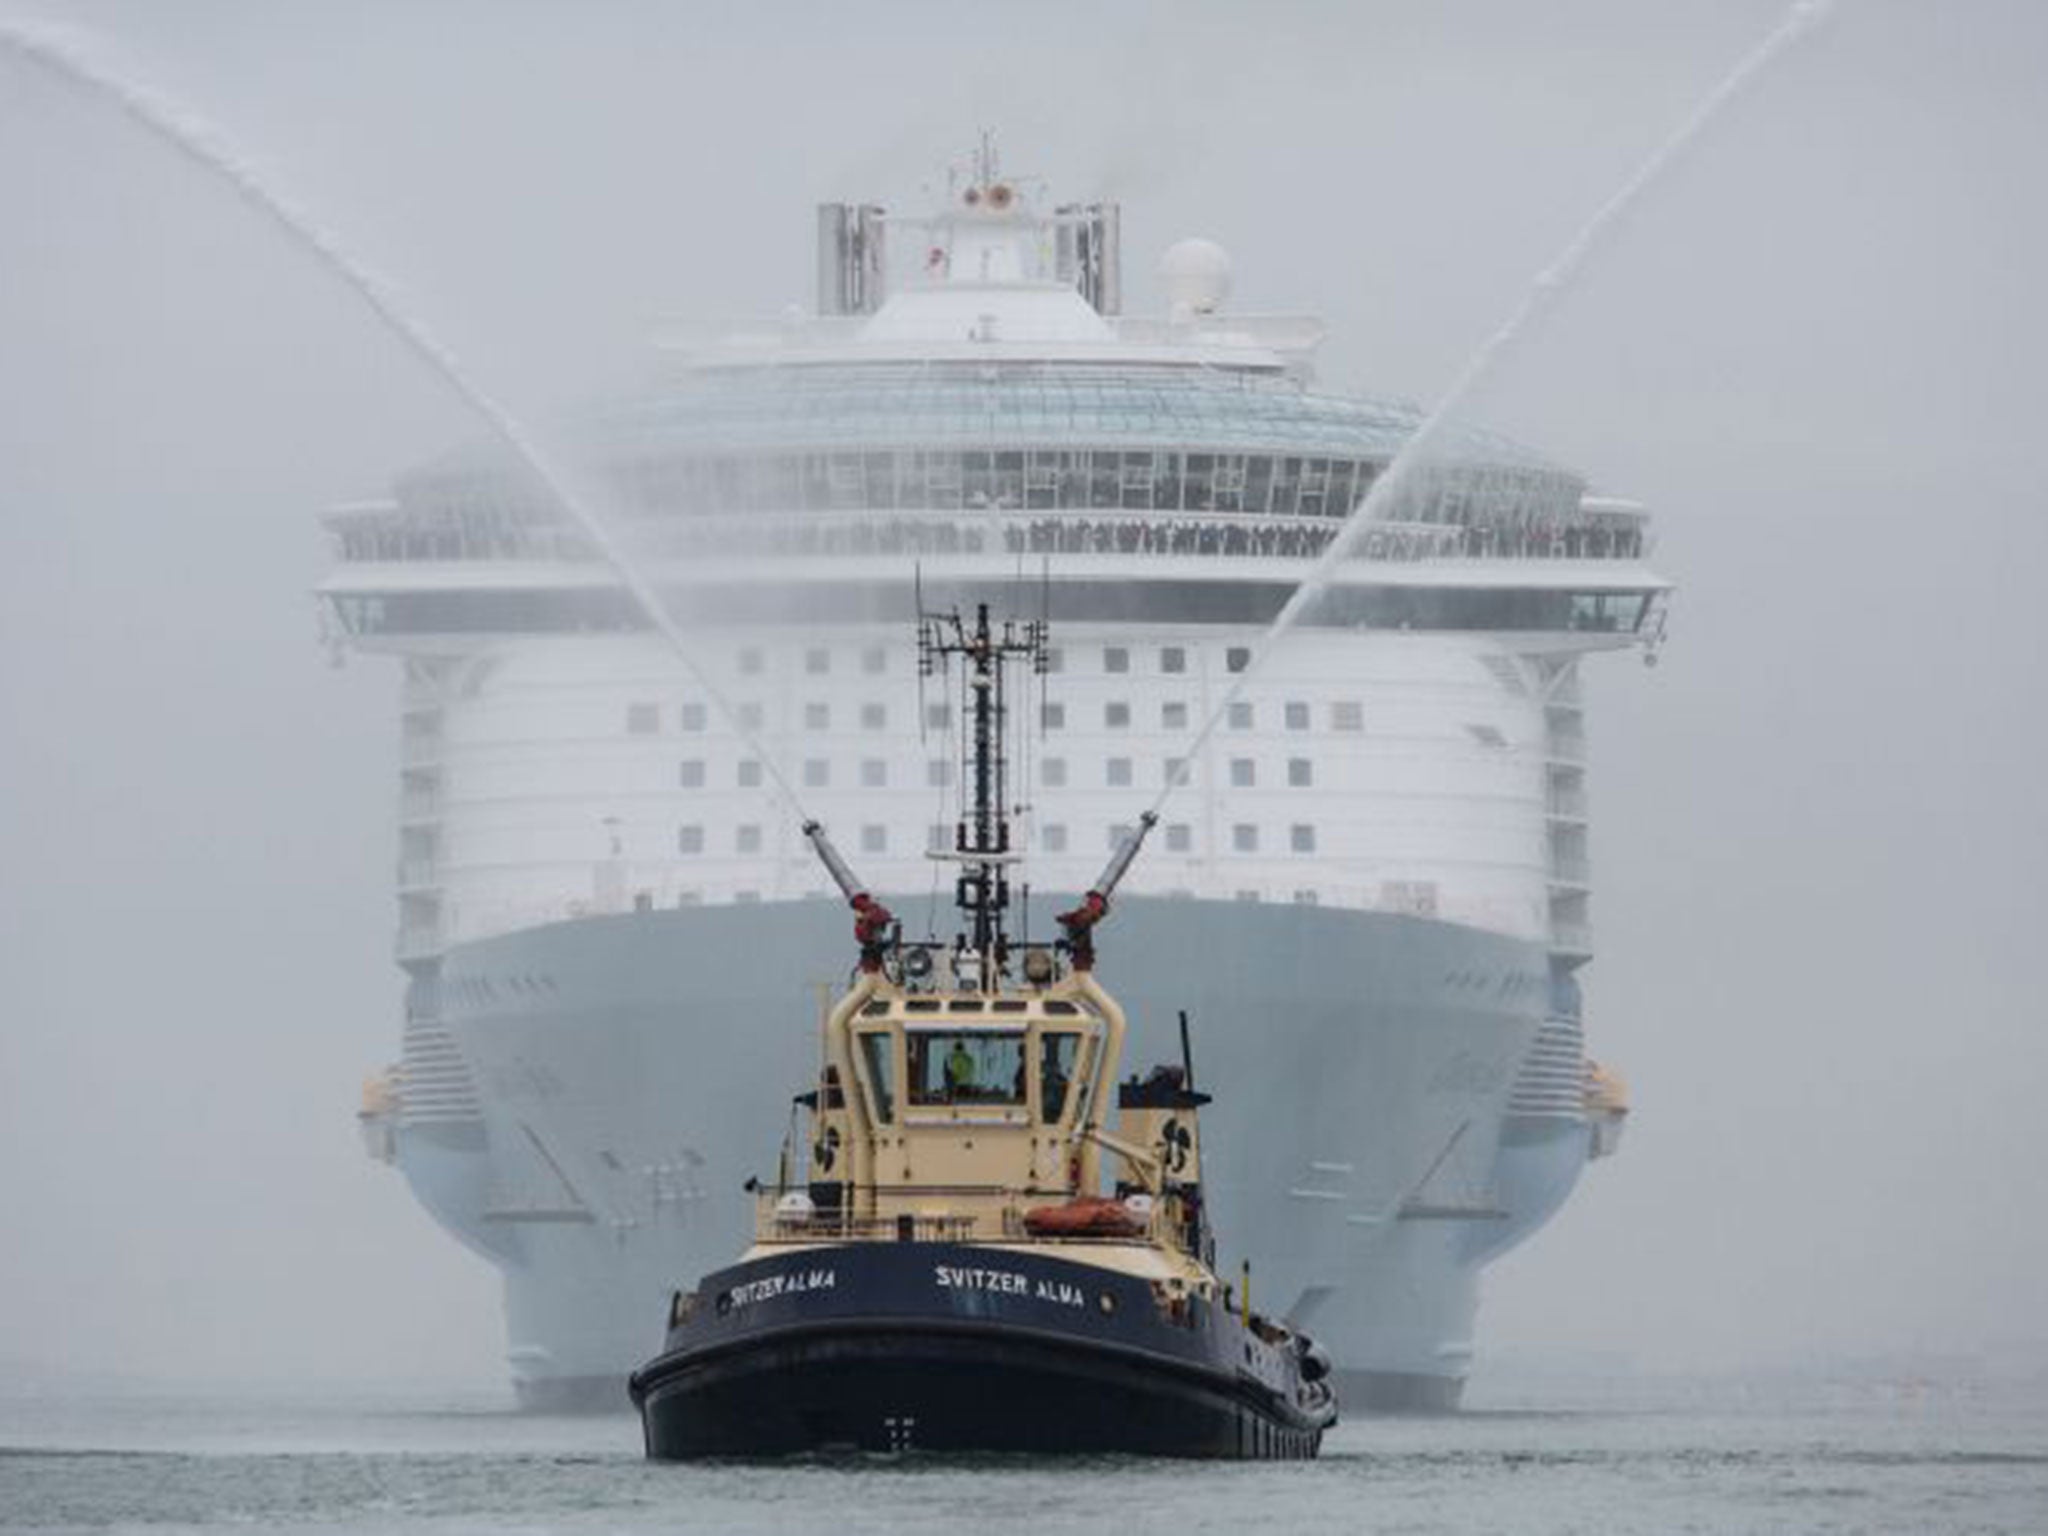 The ‘Oasis of the Seas’, the largest cruise ship in the world (AP)